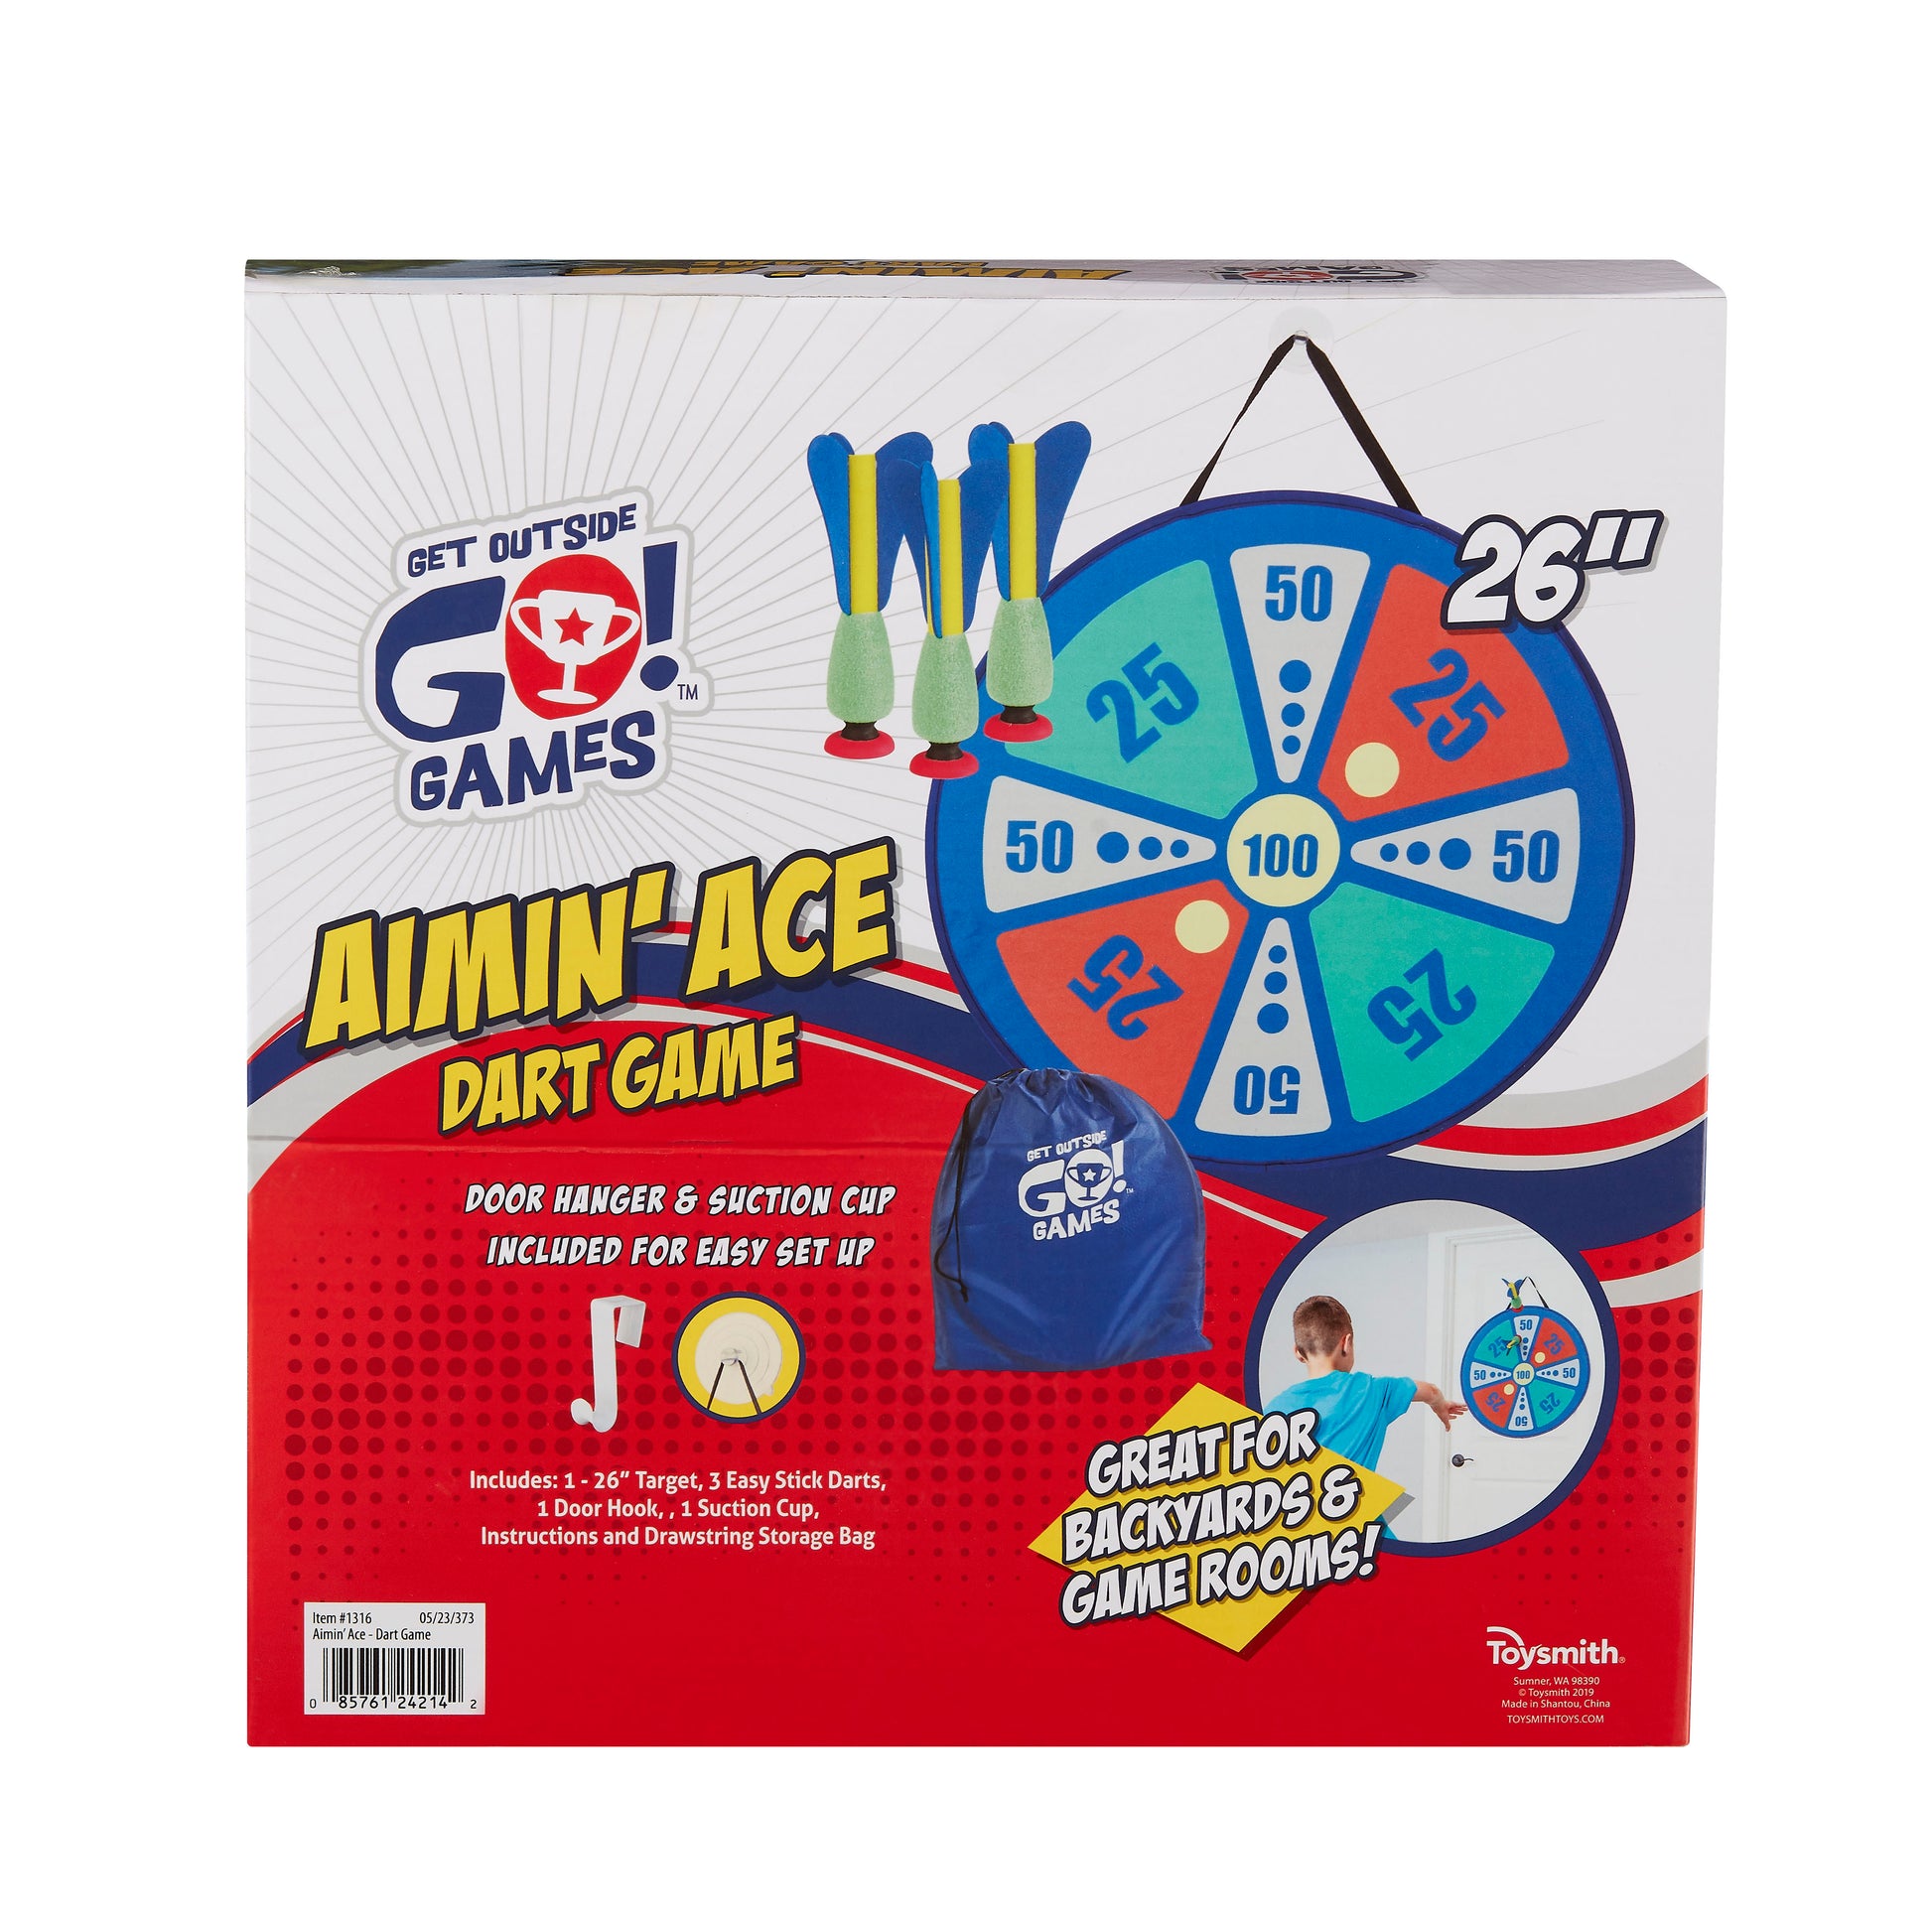 Back of package containing Aimin' Ace Dart Game